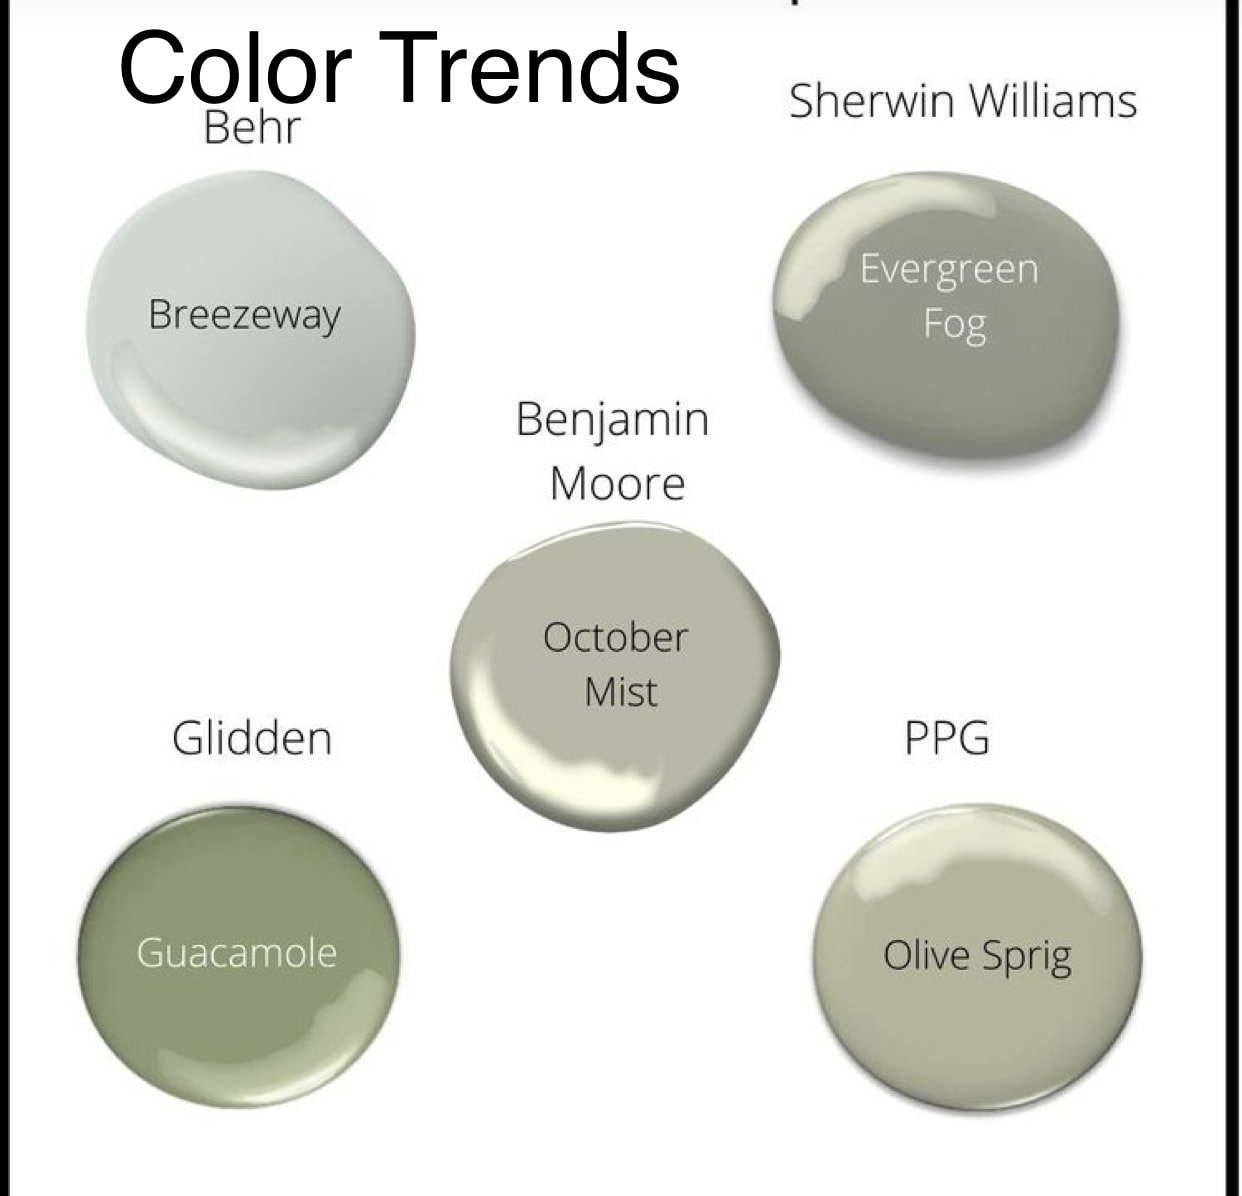 Sherwin Williams Color Trends